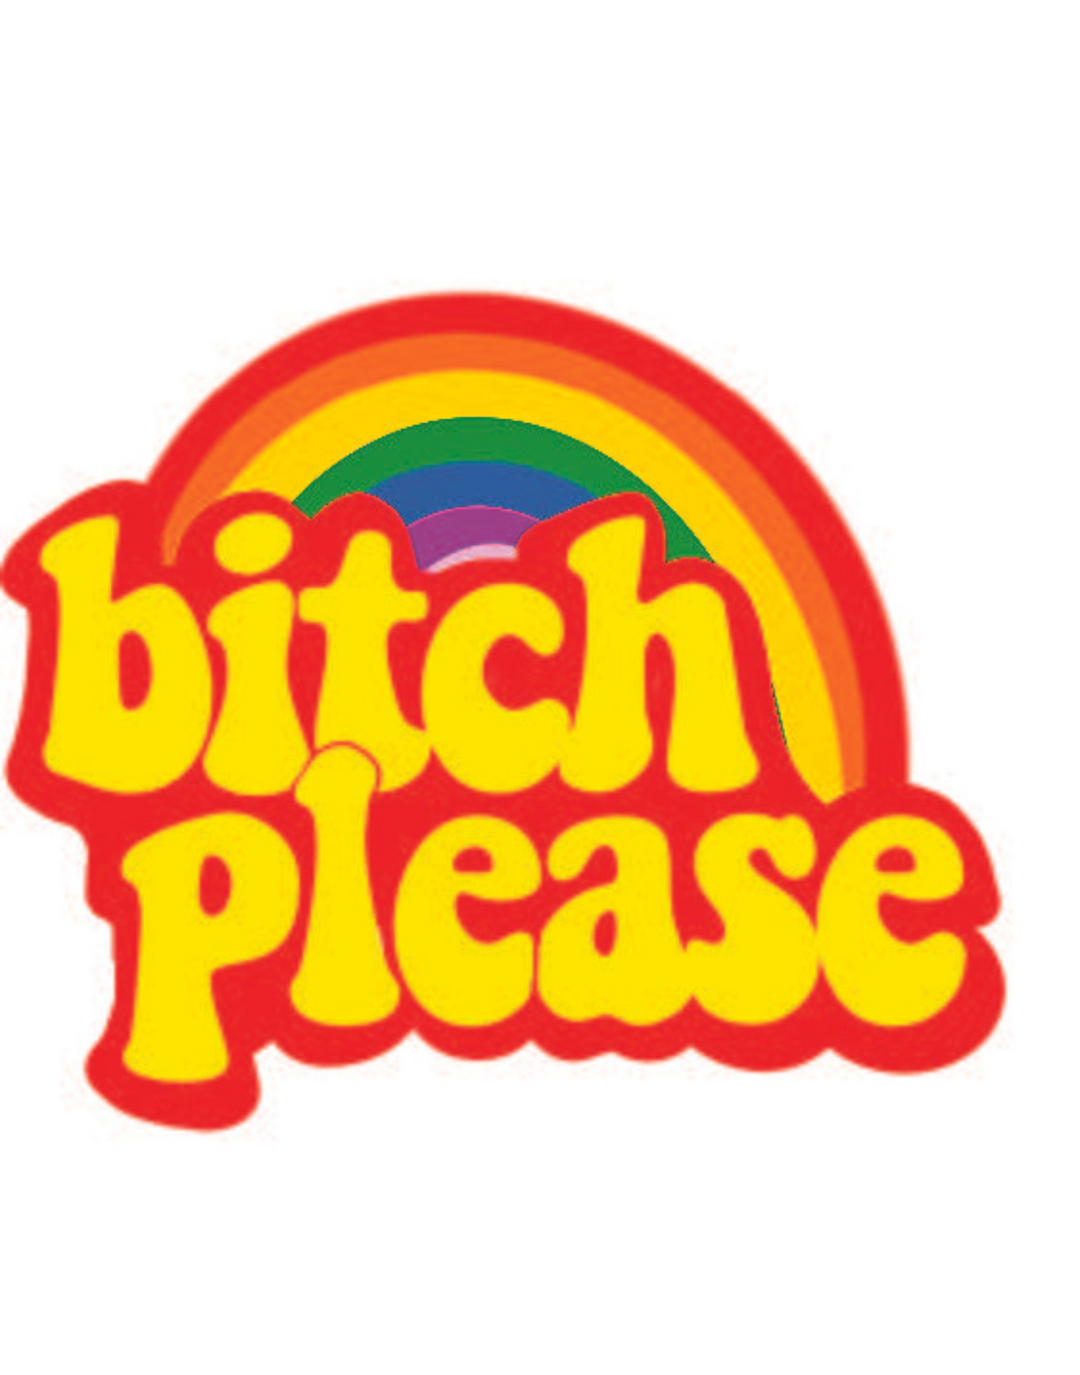 BITCH PLEASE POSTER IN MULTIPLE COLORS - PosterFi